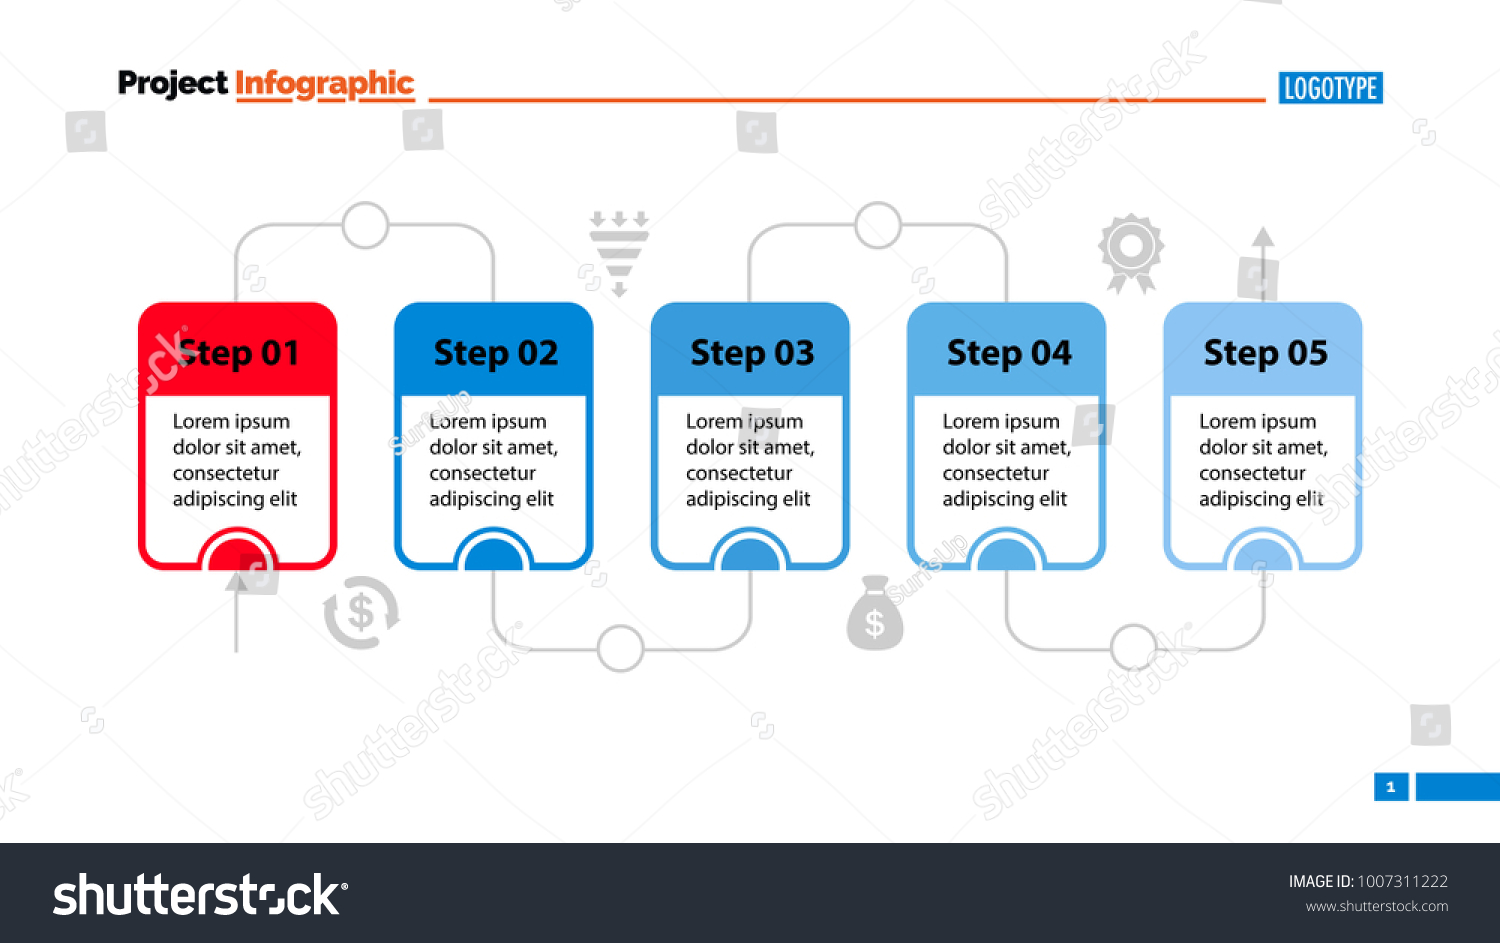 Five Steps Of Workflow Slide Template Royalty Free Stock Vector 1007311222 3707